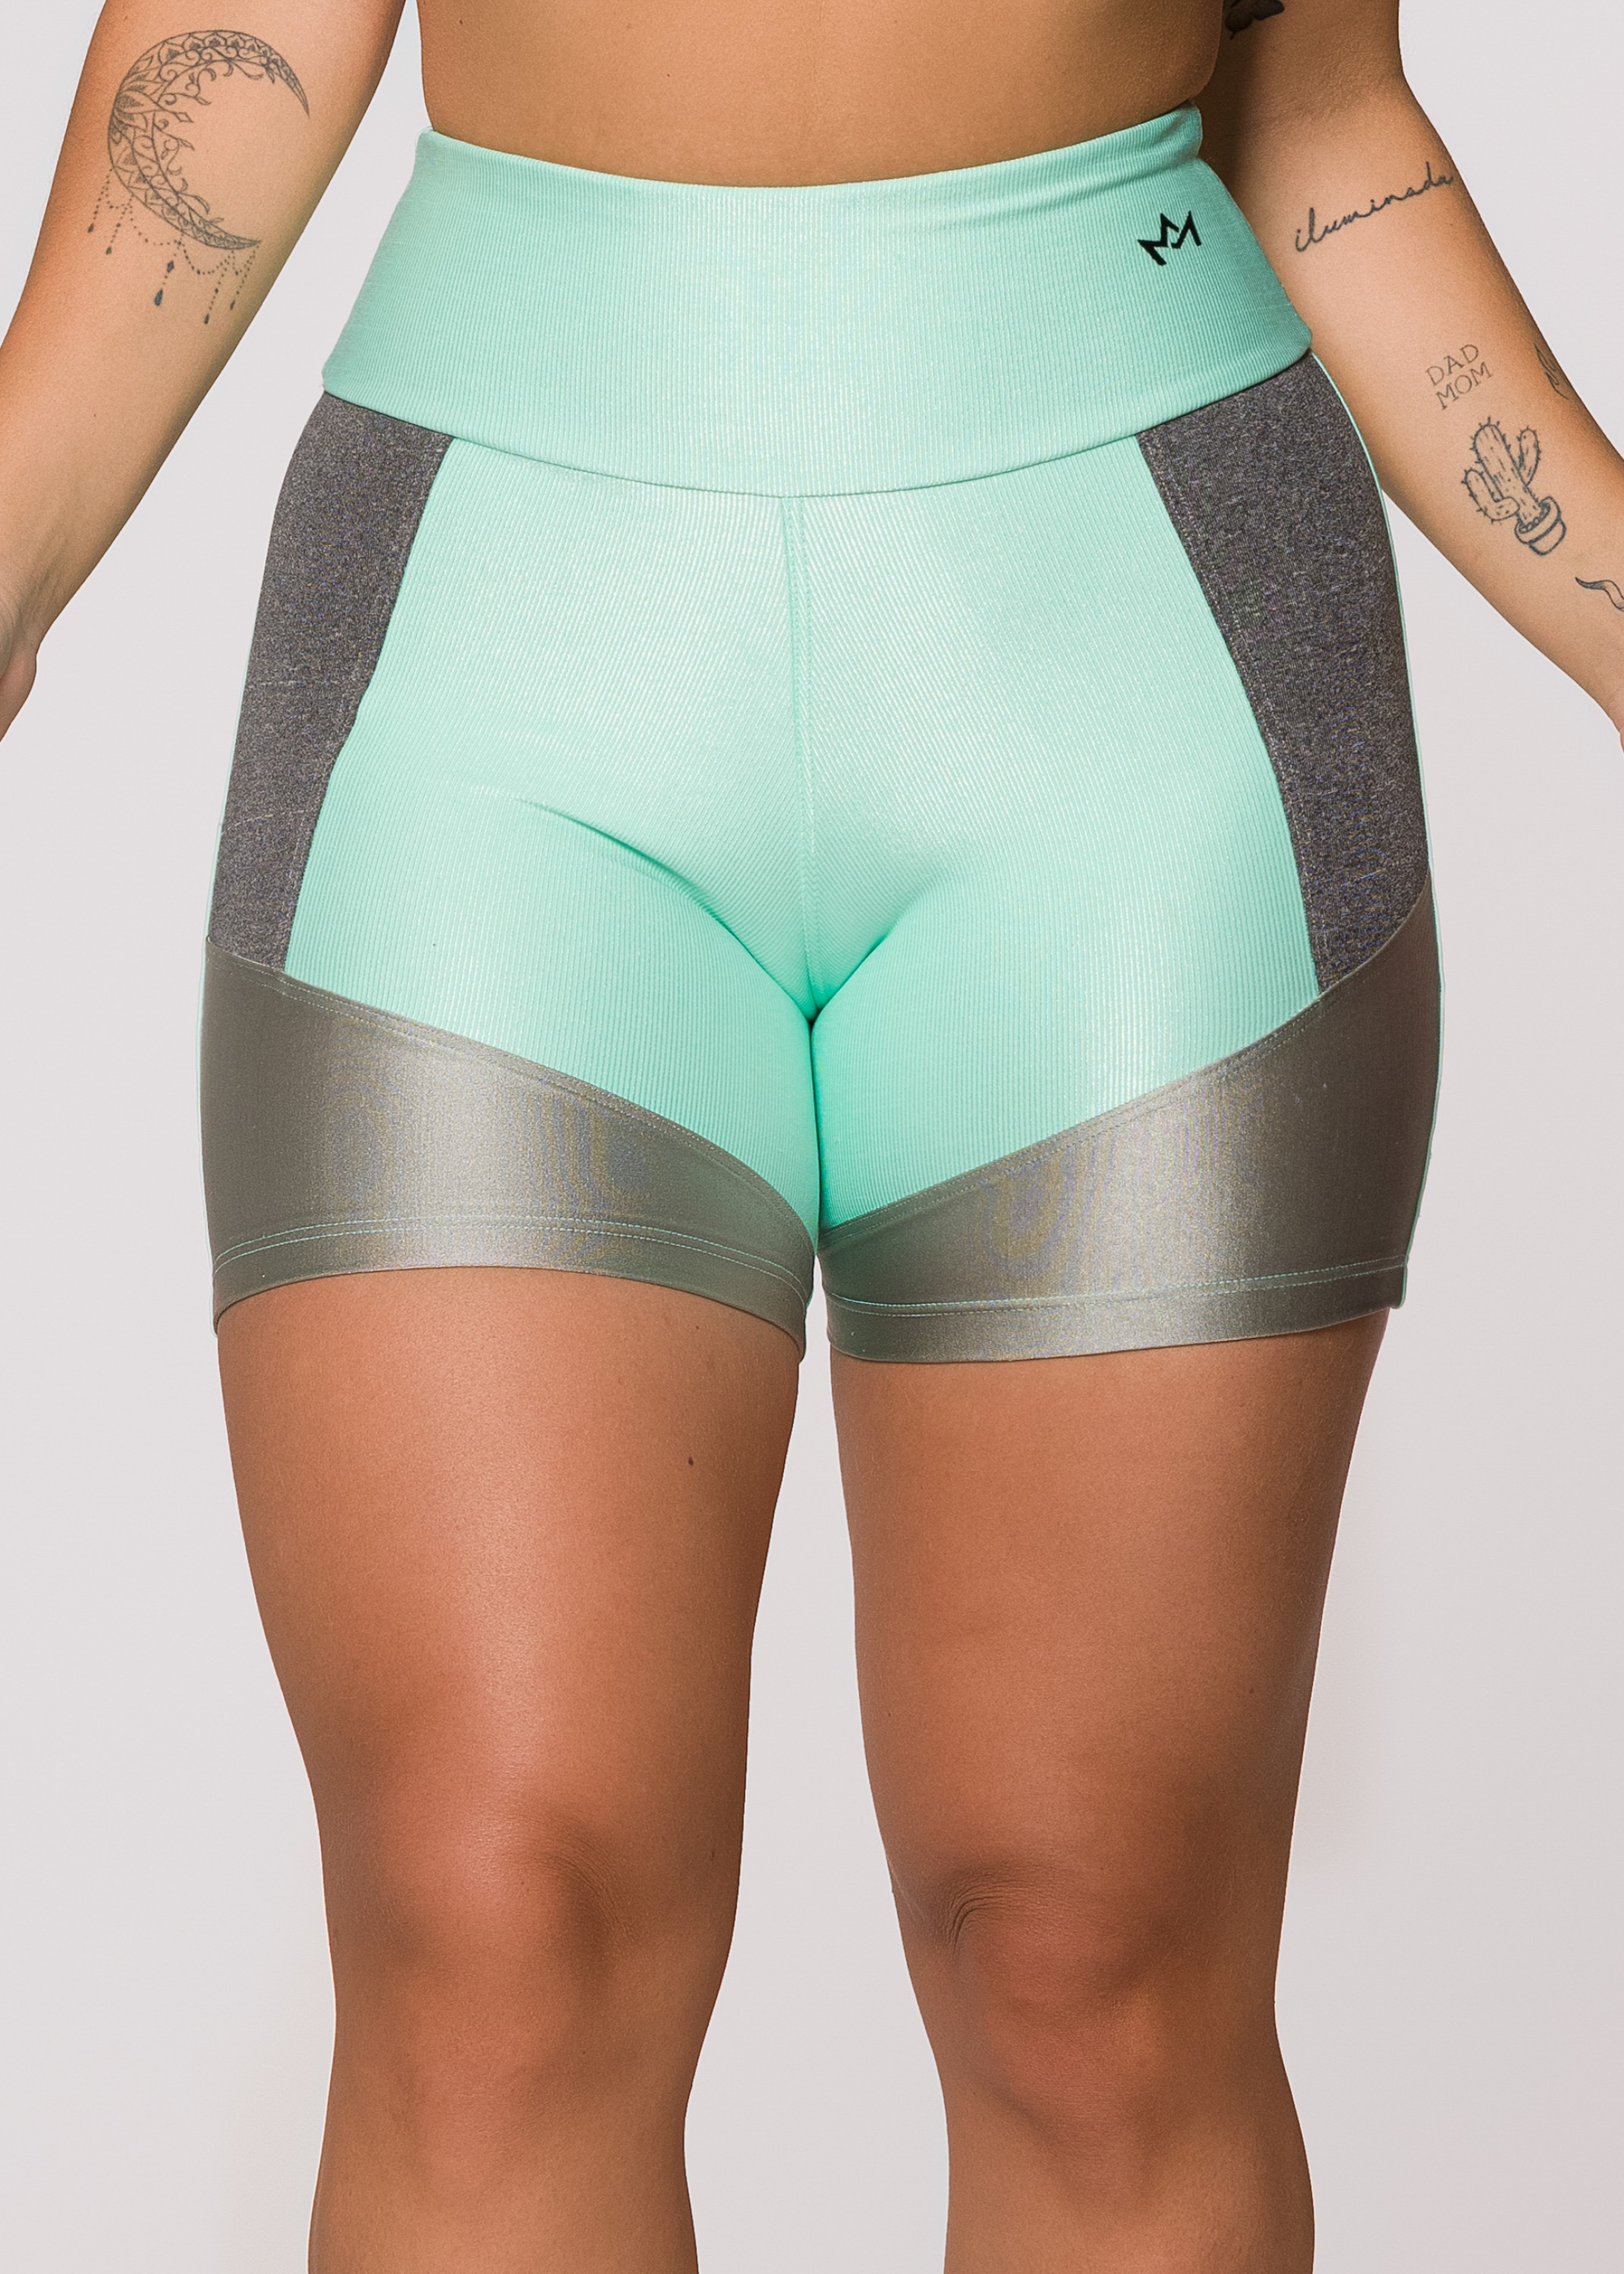 Fitness Yoga Shorts - Fitmei